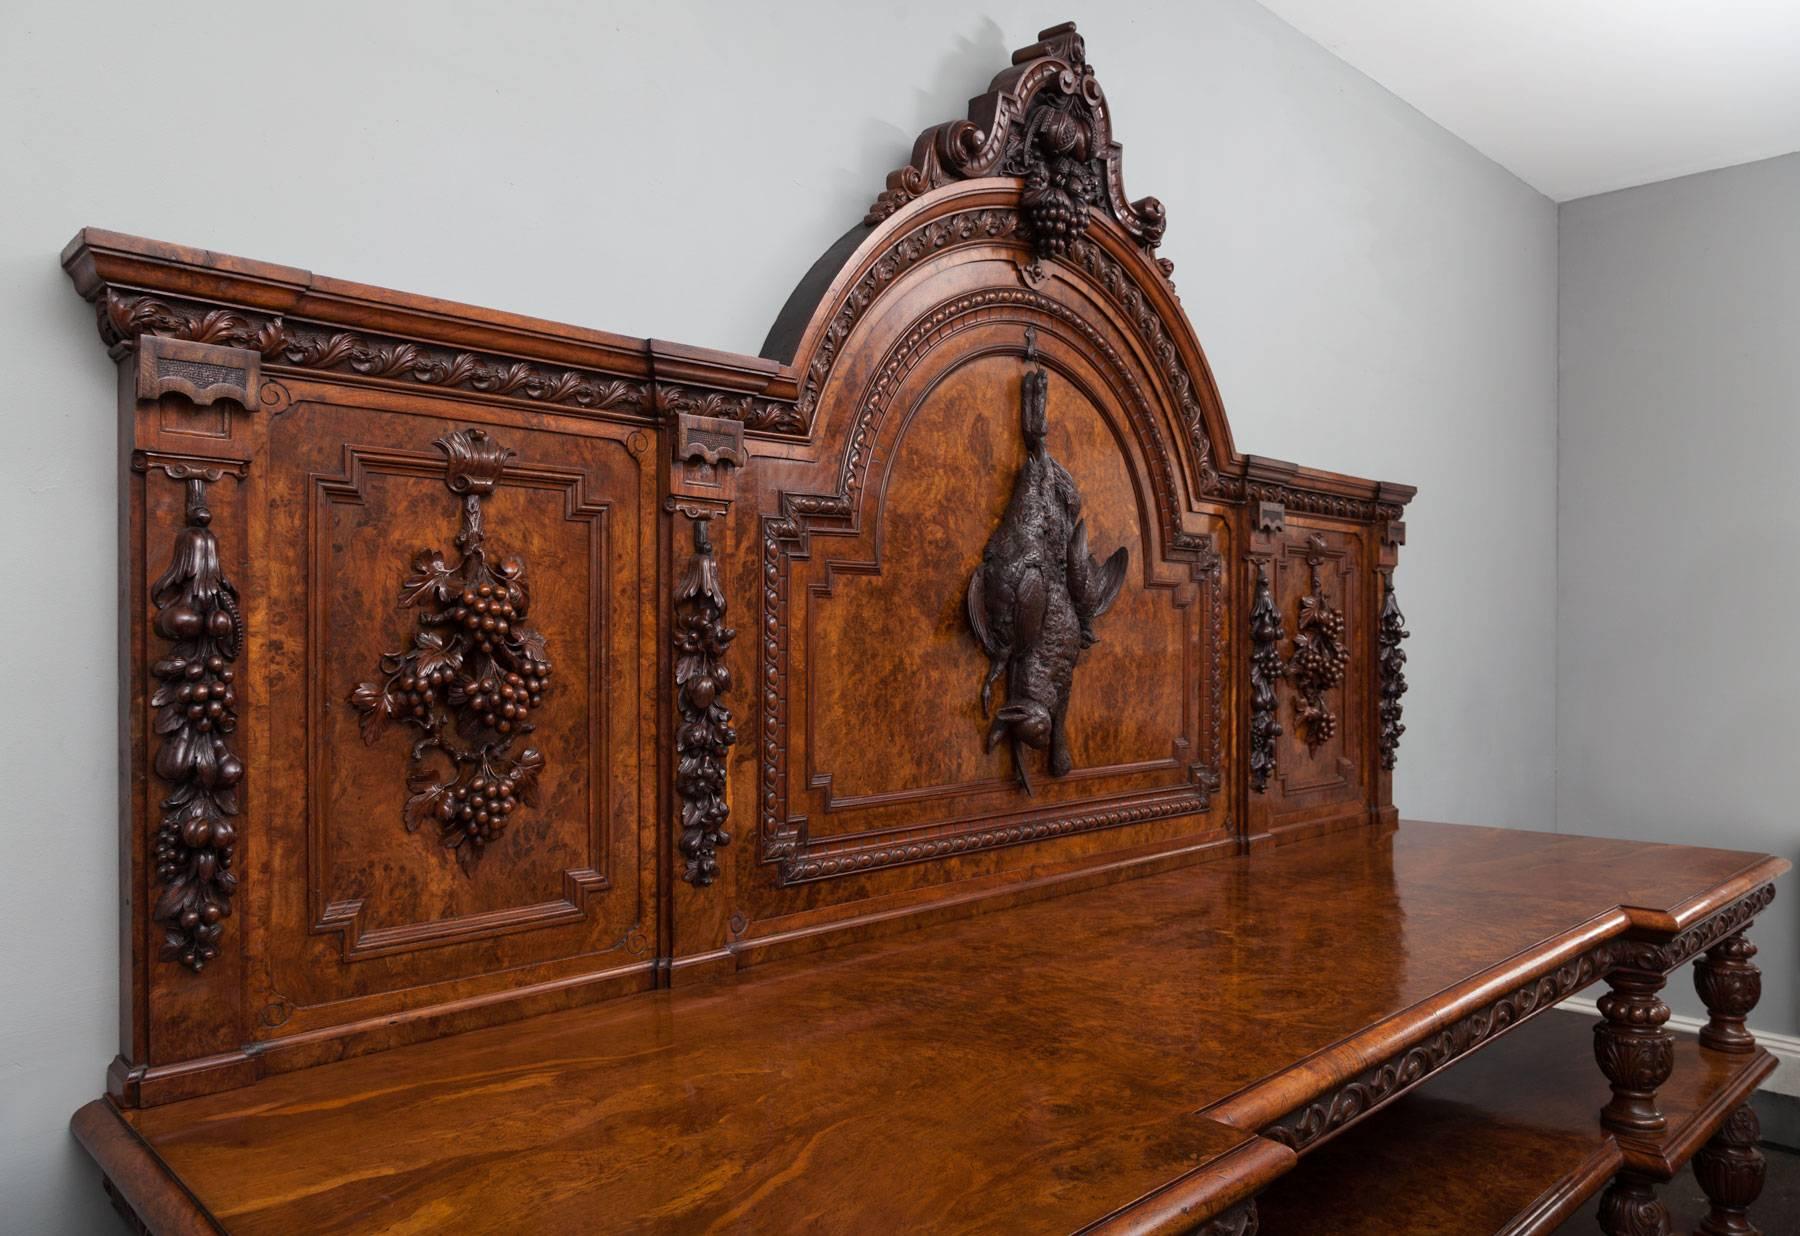 Large antique pollard oak sideboard of exceptional quality and great architecture form.
This wonderful sideboard, server or buffet boasts exquisitely carved elements and eye-catching pollard oak veneers. The arch topped back is carved with a hunt